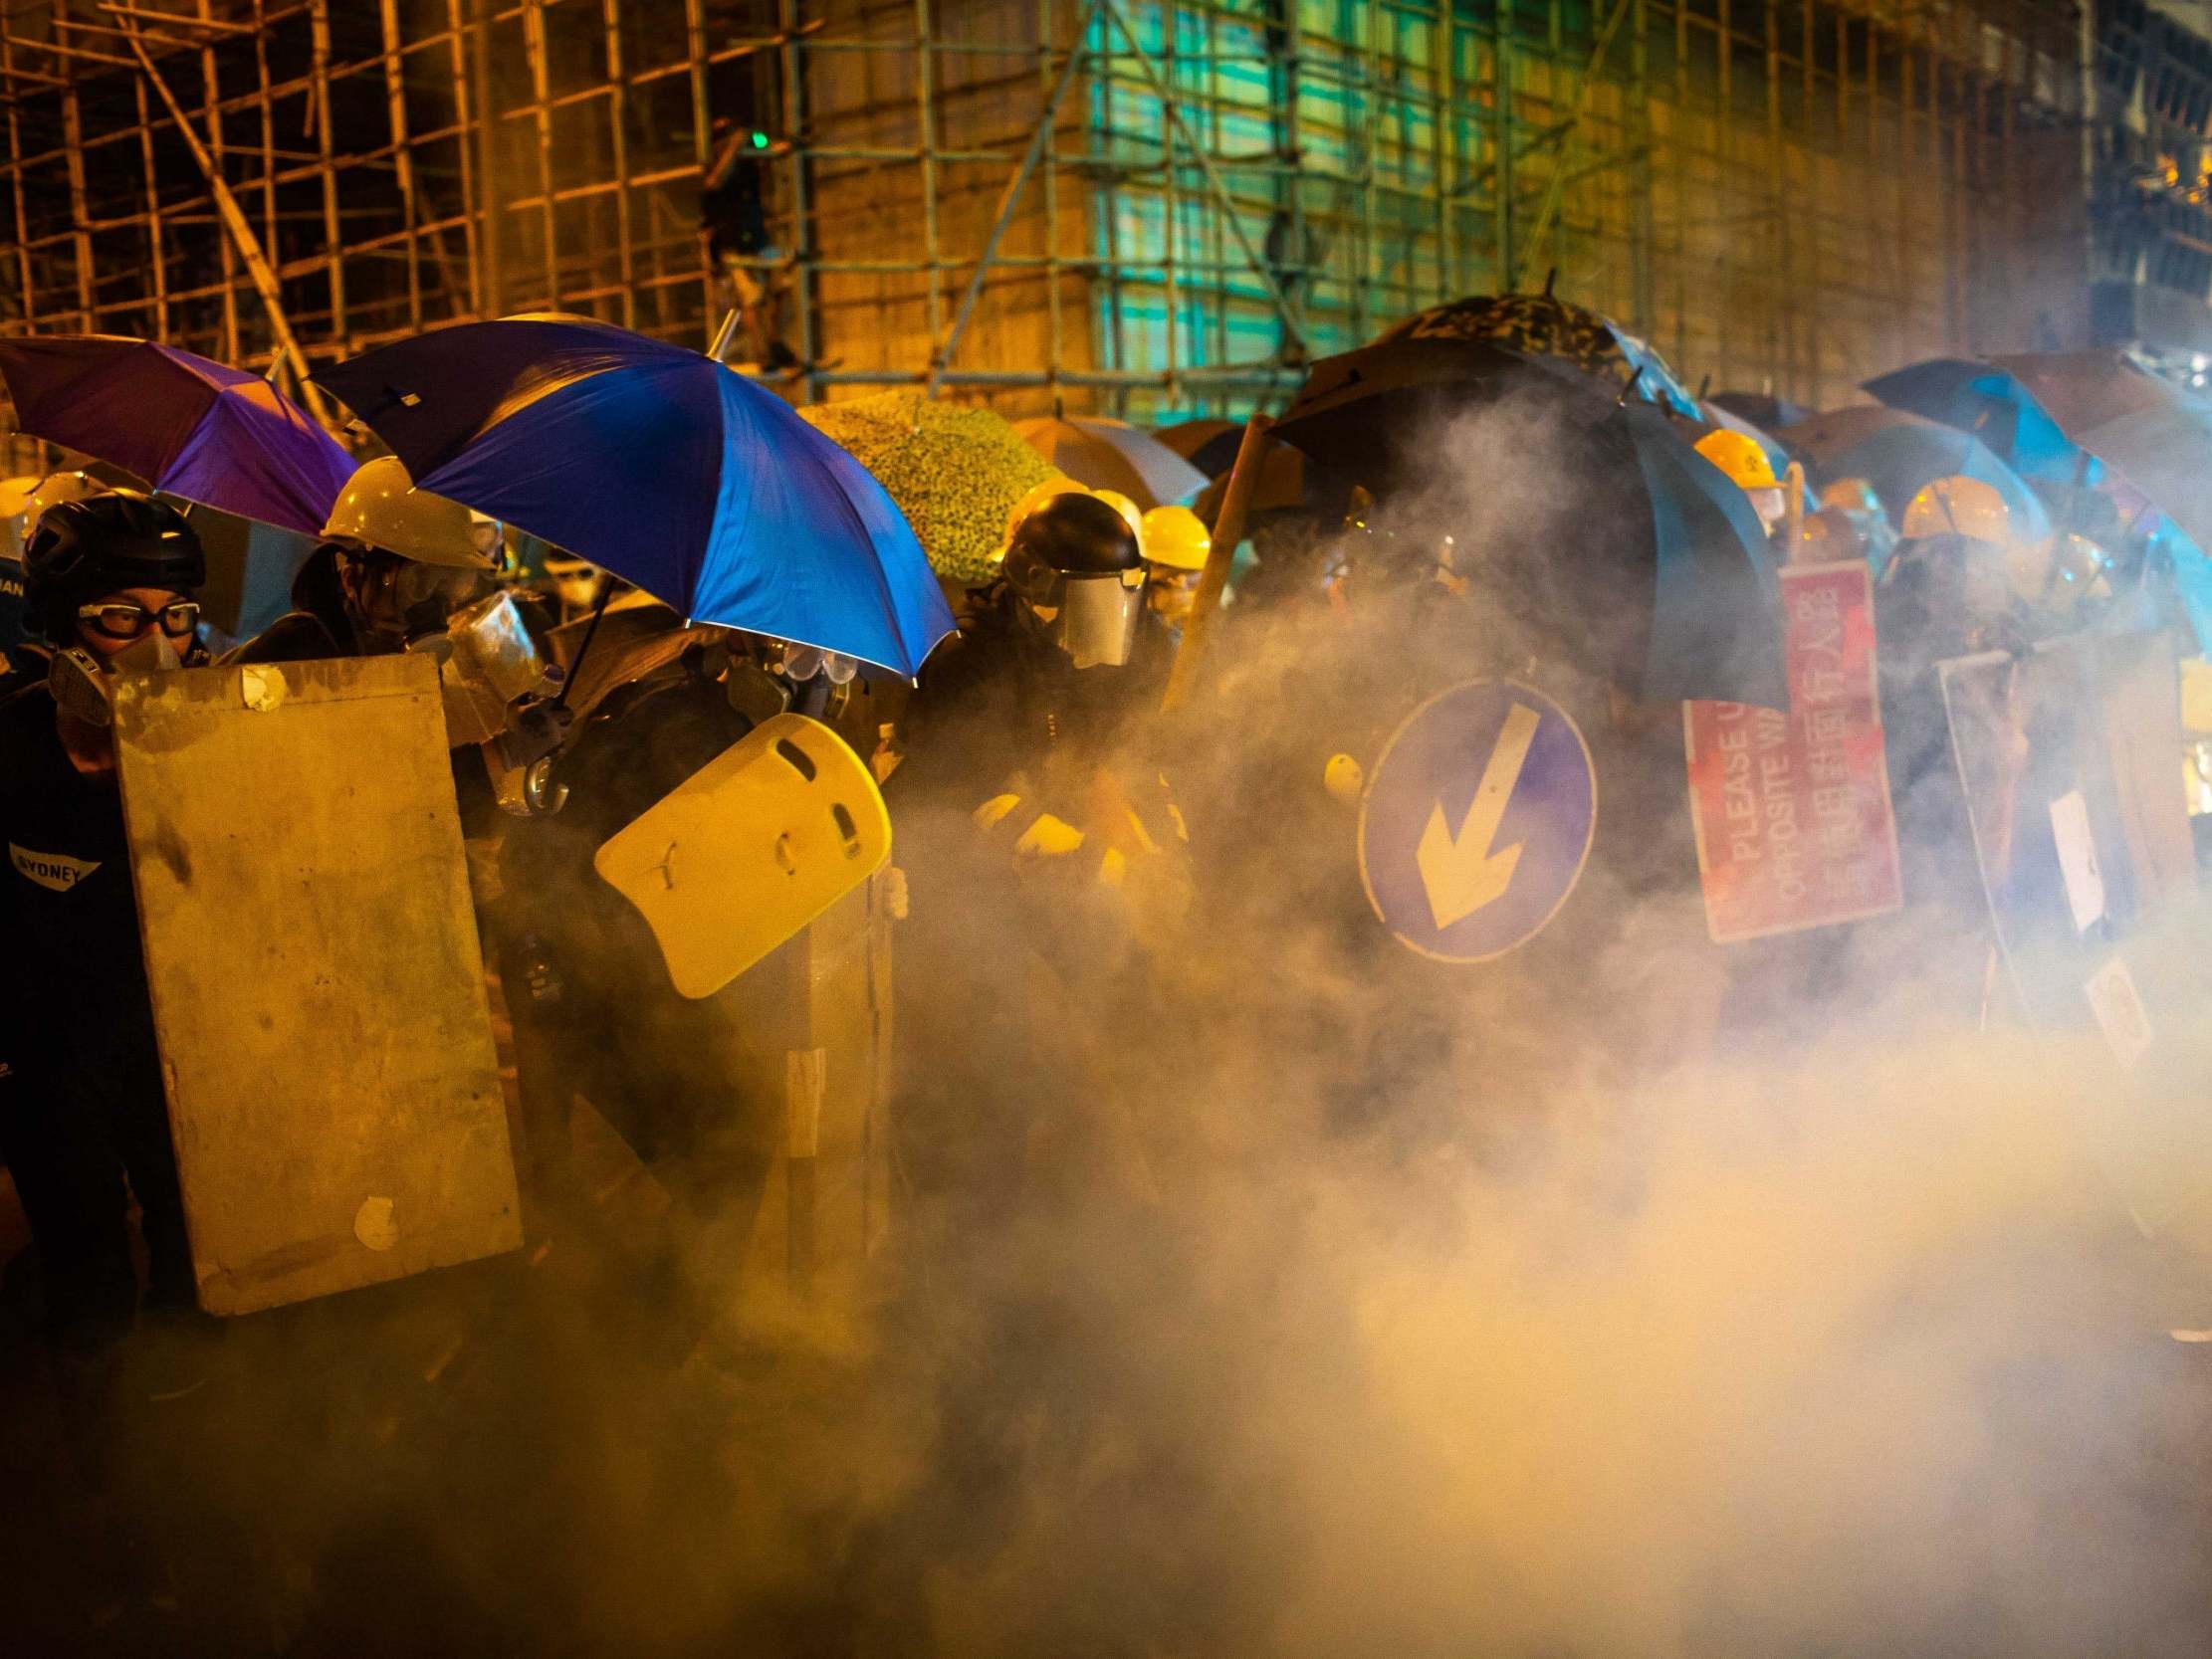 Police fired tear gas at demonstrators for the second day in a row as Hong Kong's democracy protests turned violent again